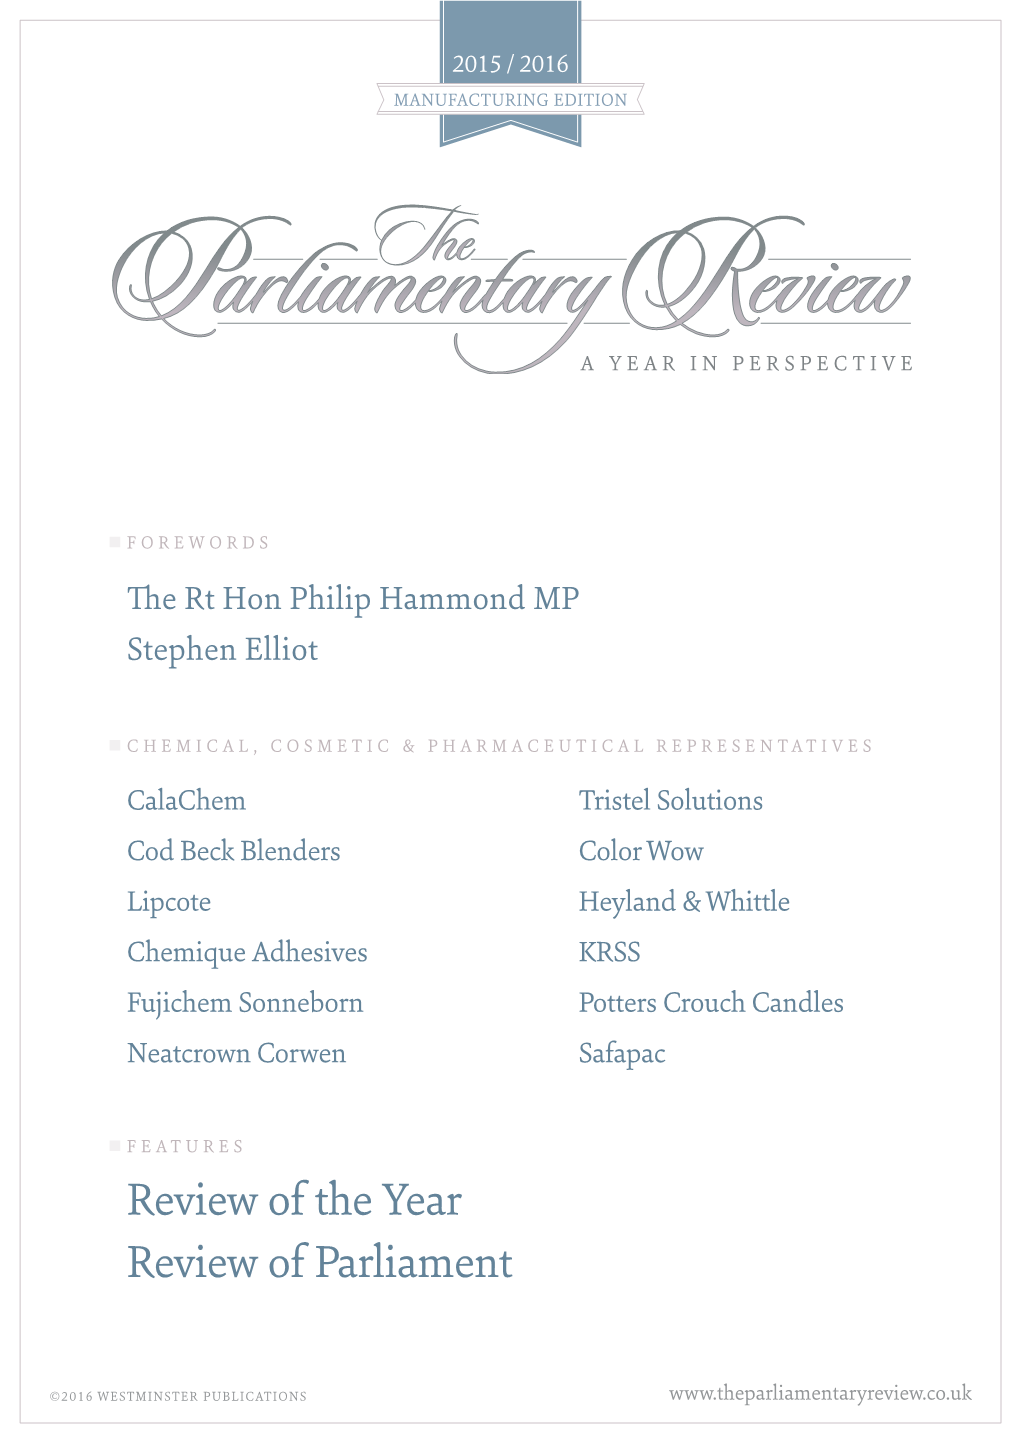 Review of the Year Review of Parliament